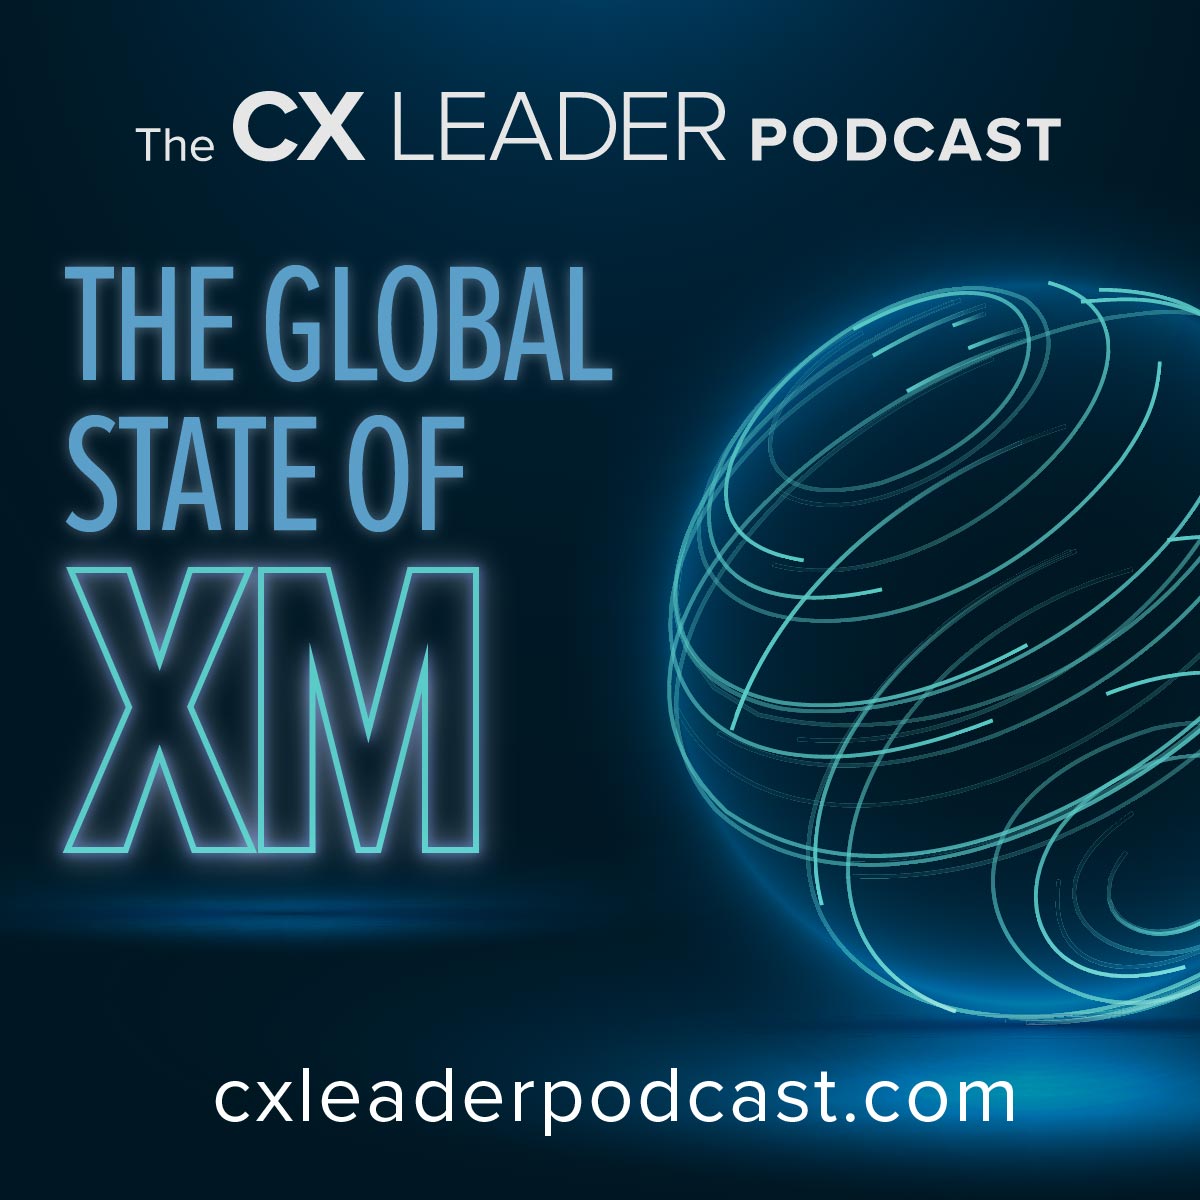 The Global State of XM